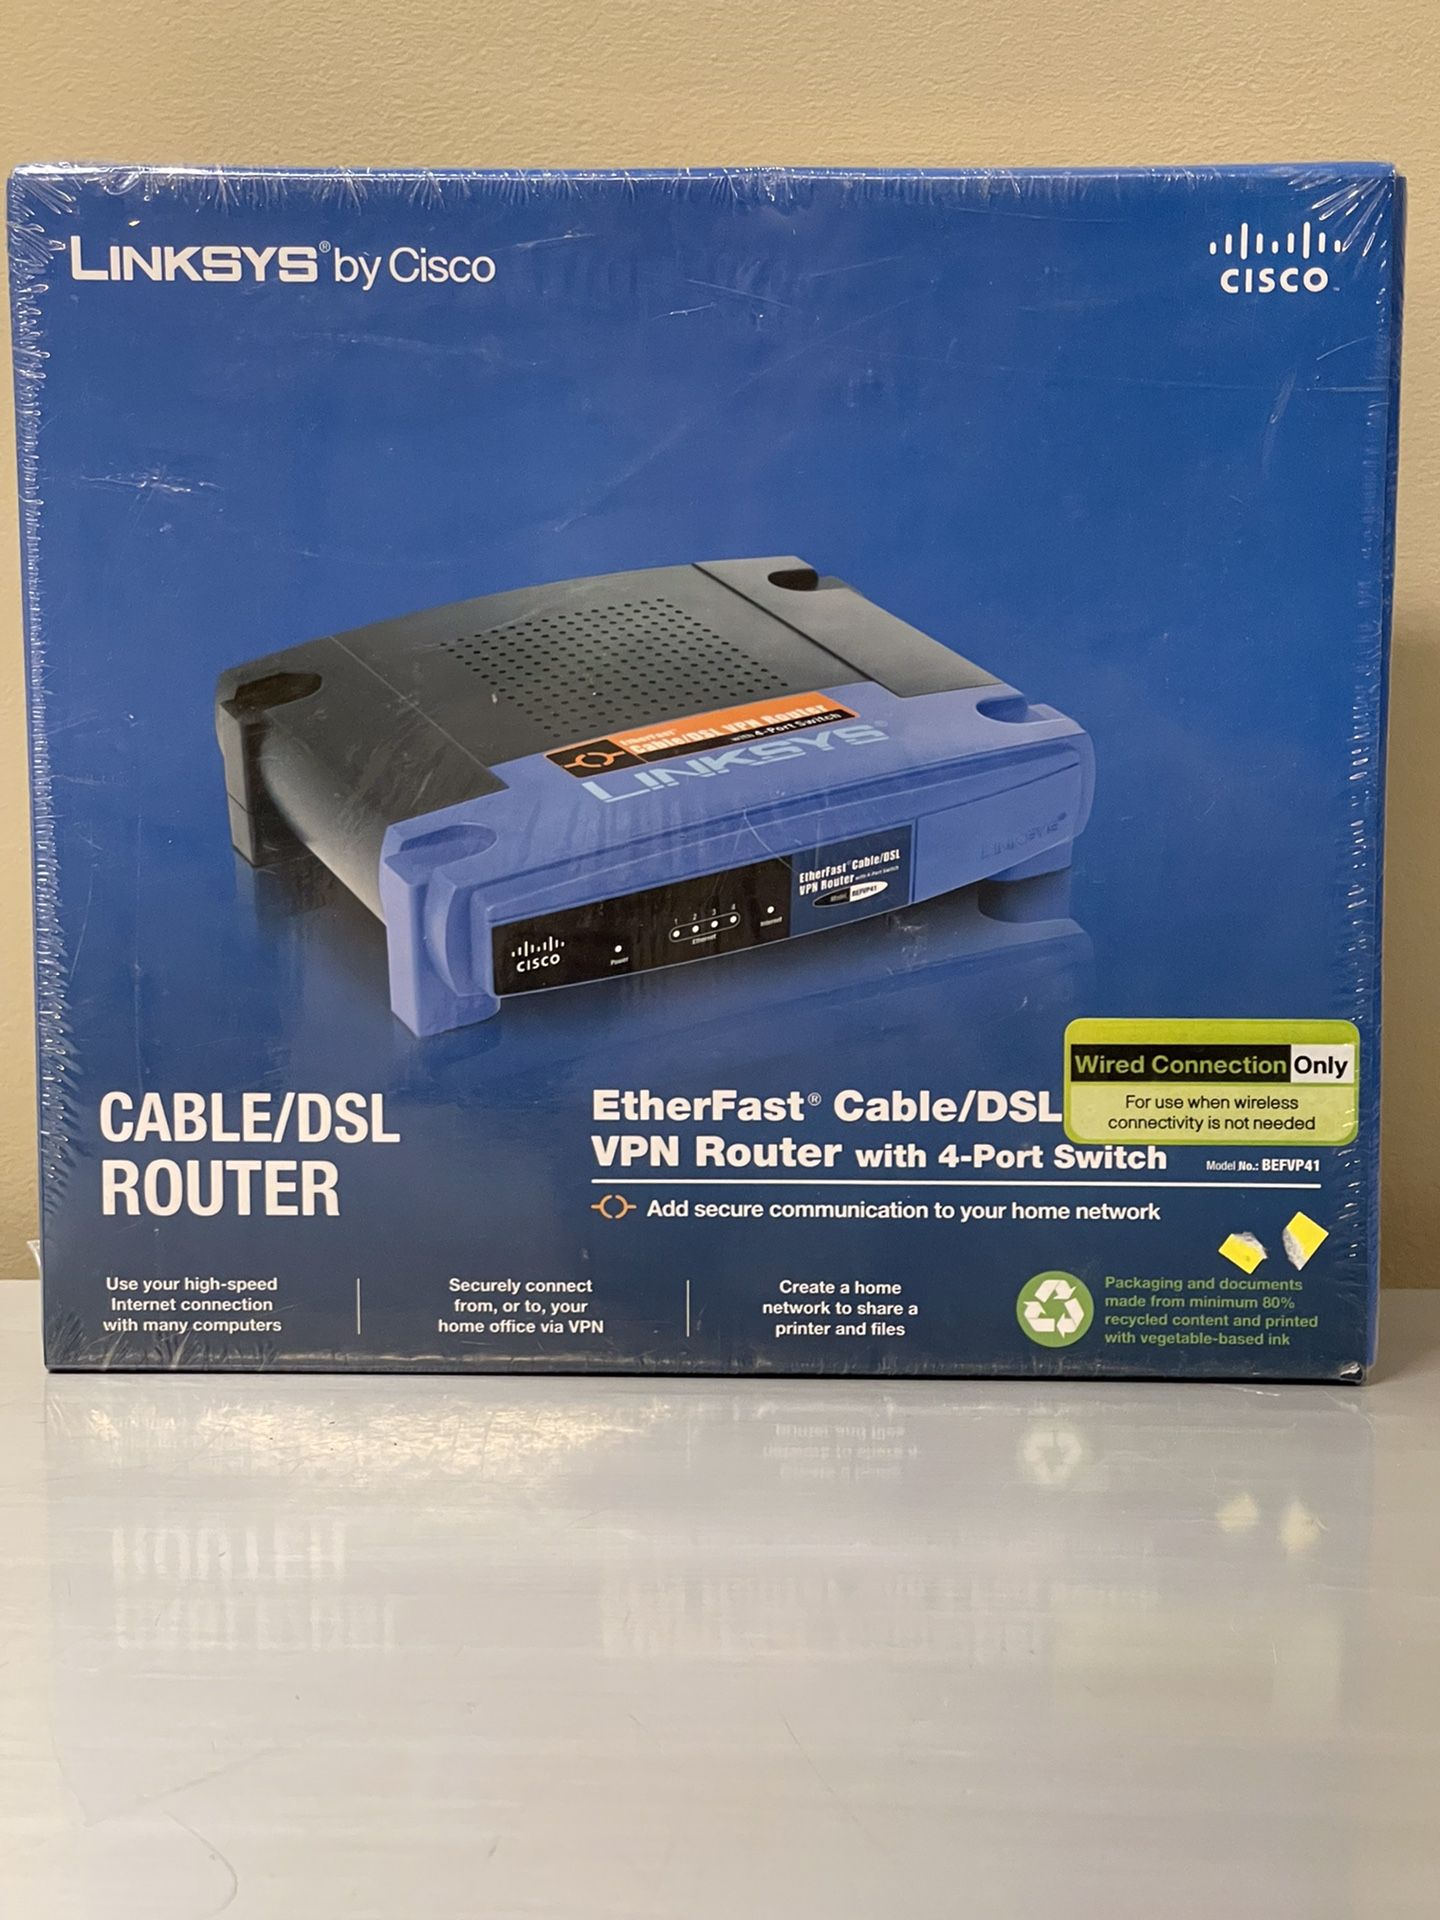 NEW!! CABLE/DSL WIRED ROUTER - "LINKSYS" by CISCO - firm price each - two (2) available 